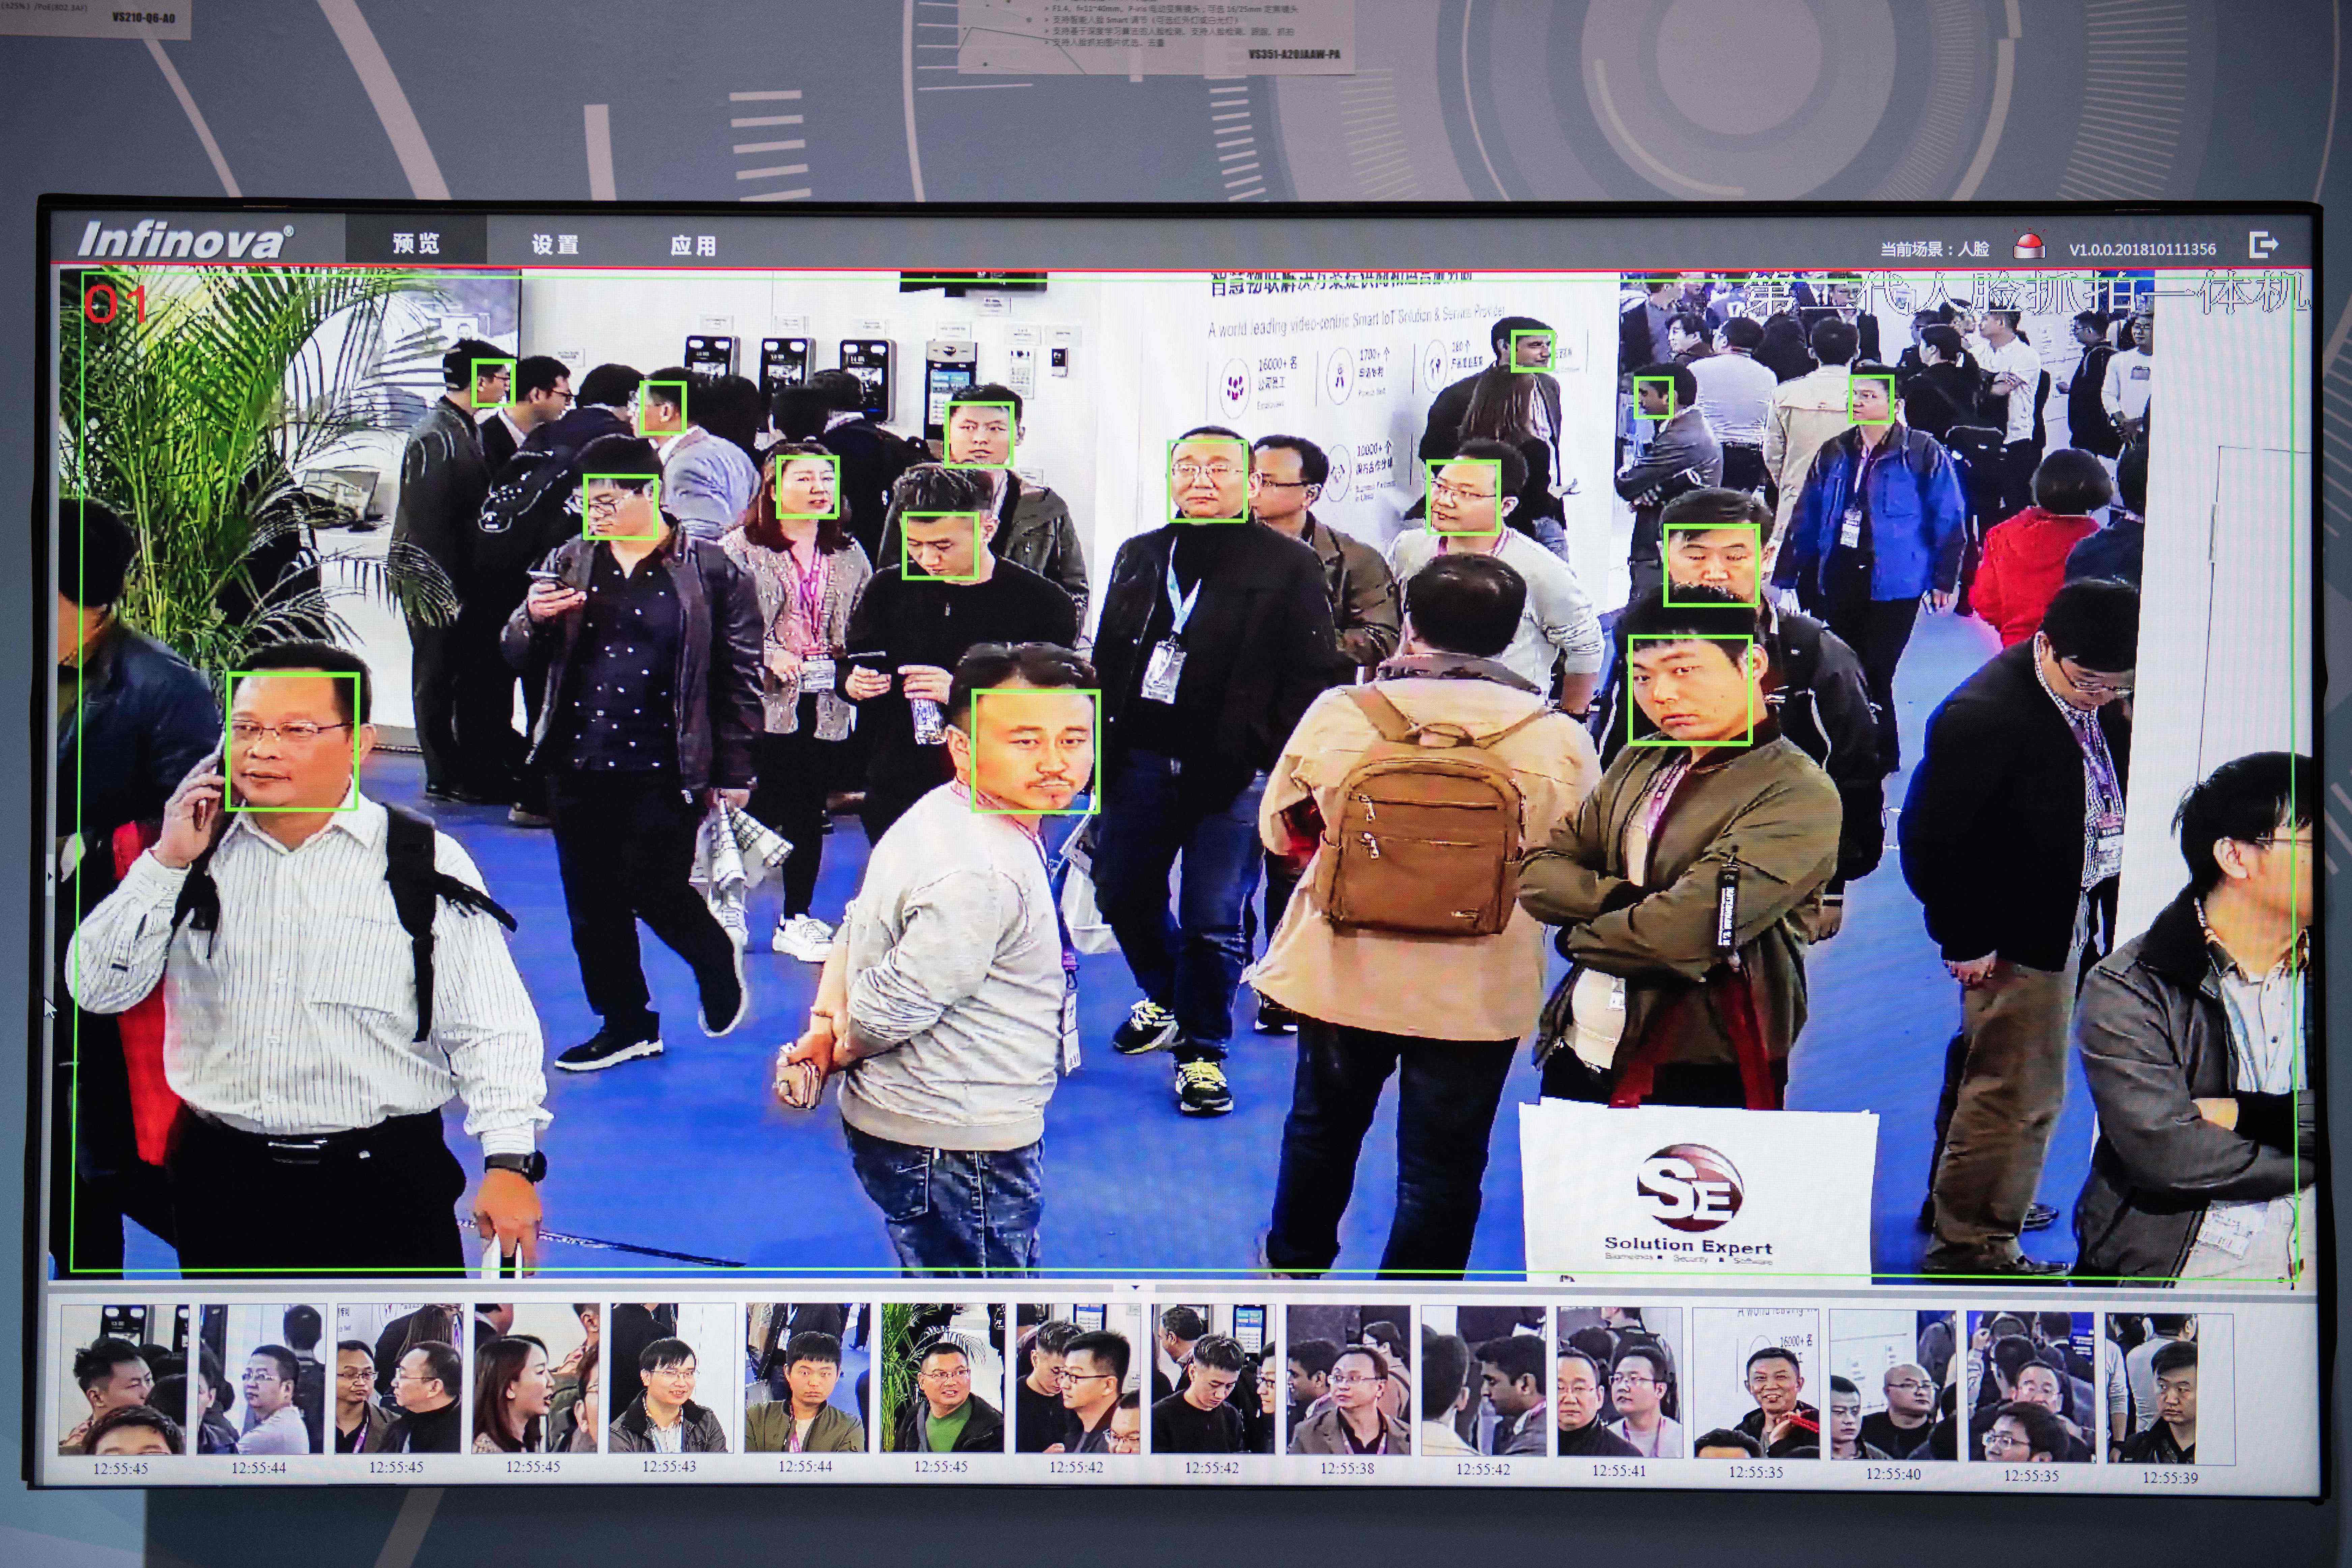 A screen shows visitors being filmed by artificial intelligence security cameras with facial recognition technology at the 14th China International Exhibition on Public Safety and Security at the China International Exhibition Centre in Beijing on Oct. 24, 2018. (NICOLAS ASFOURI/AFP/Getty Images)